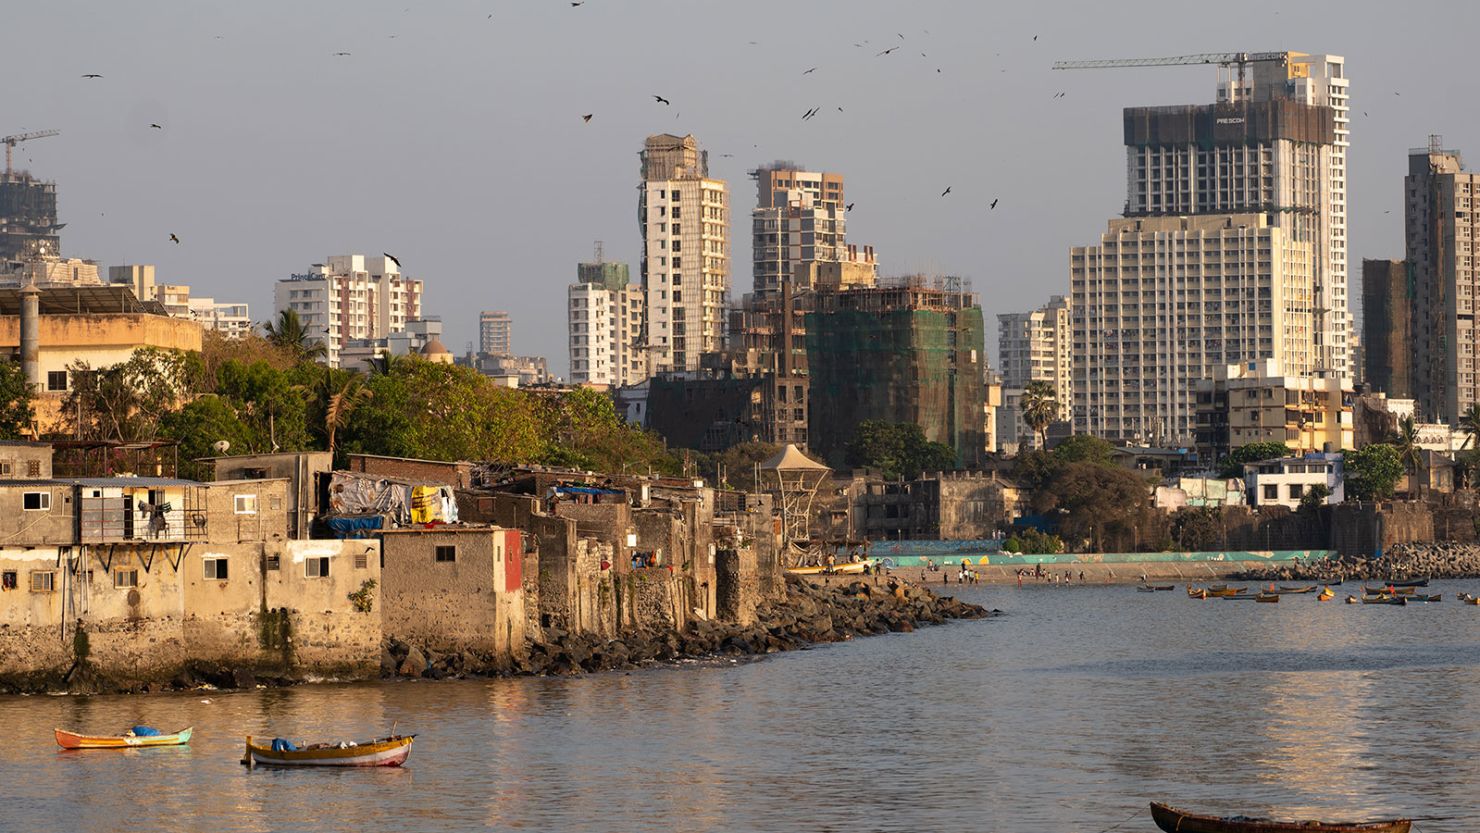 Slums are seen near commercial high-rise buildings in Mumbai, India, on April 14, 2024.